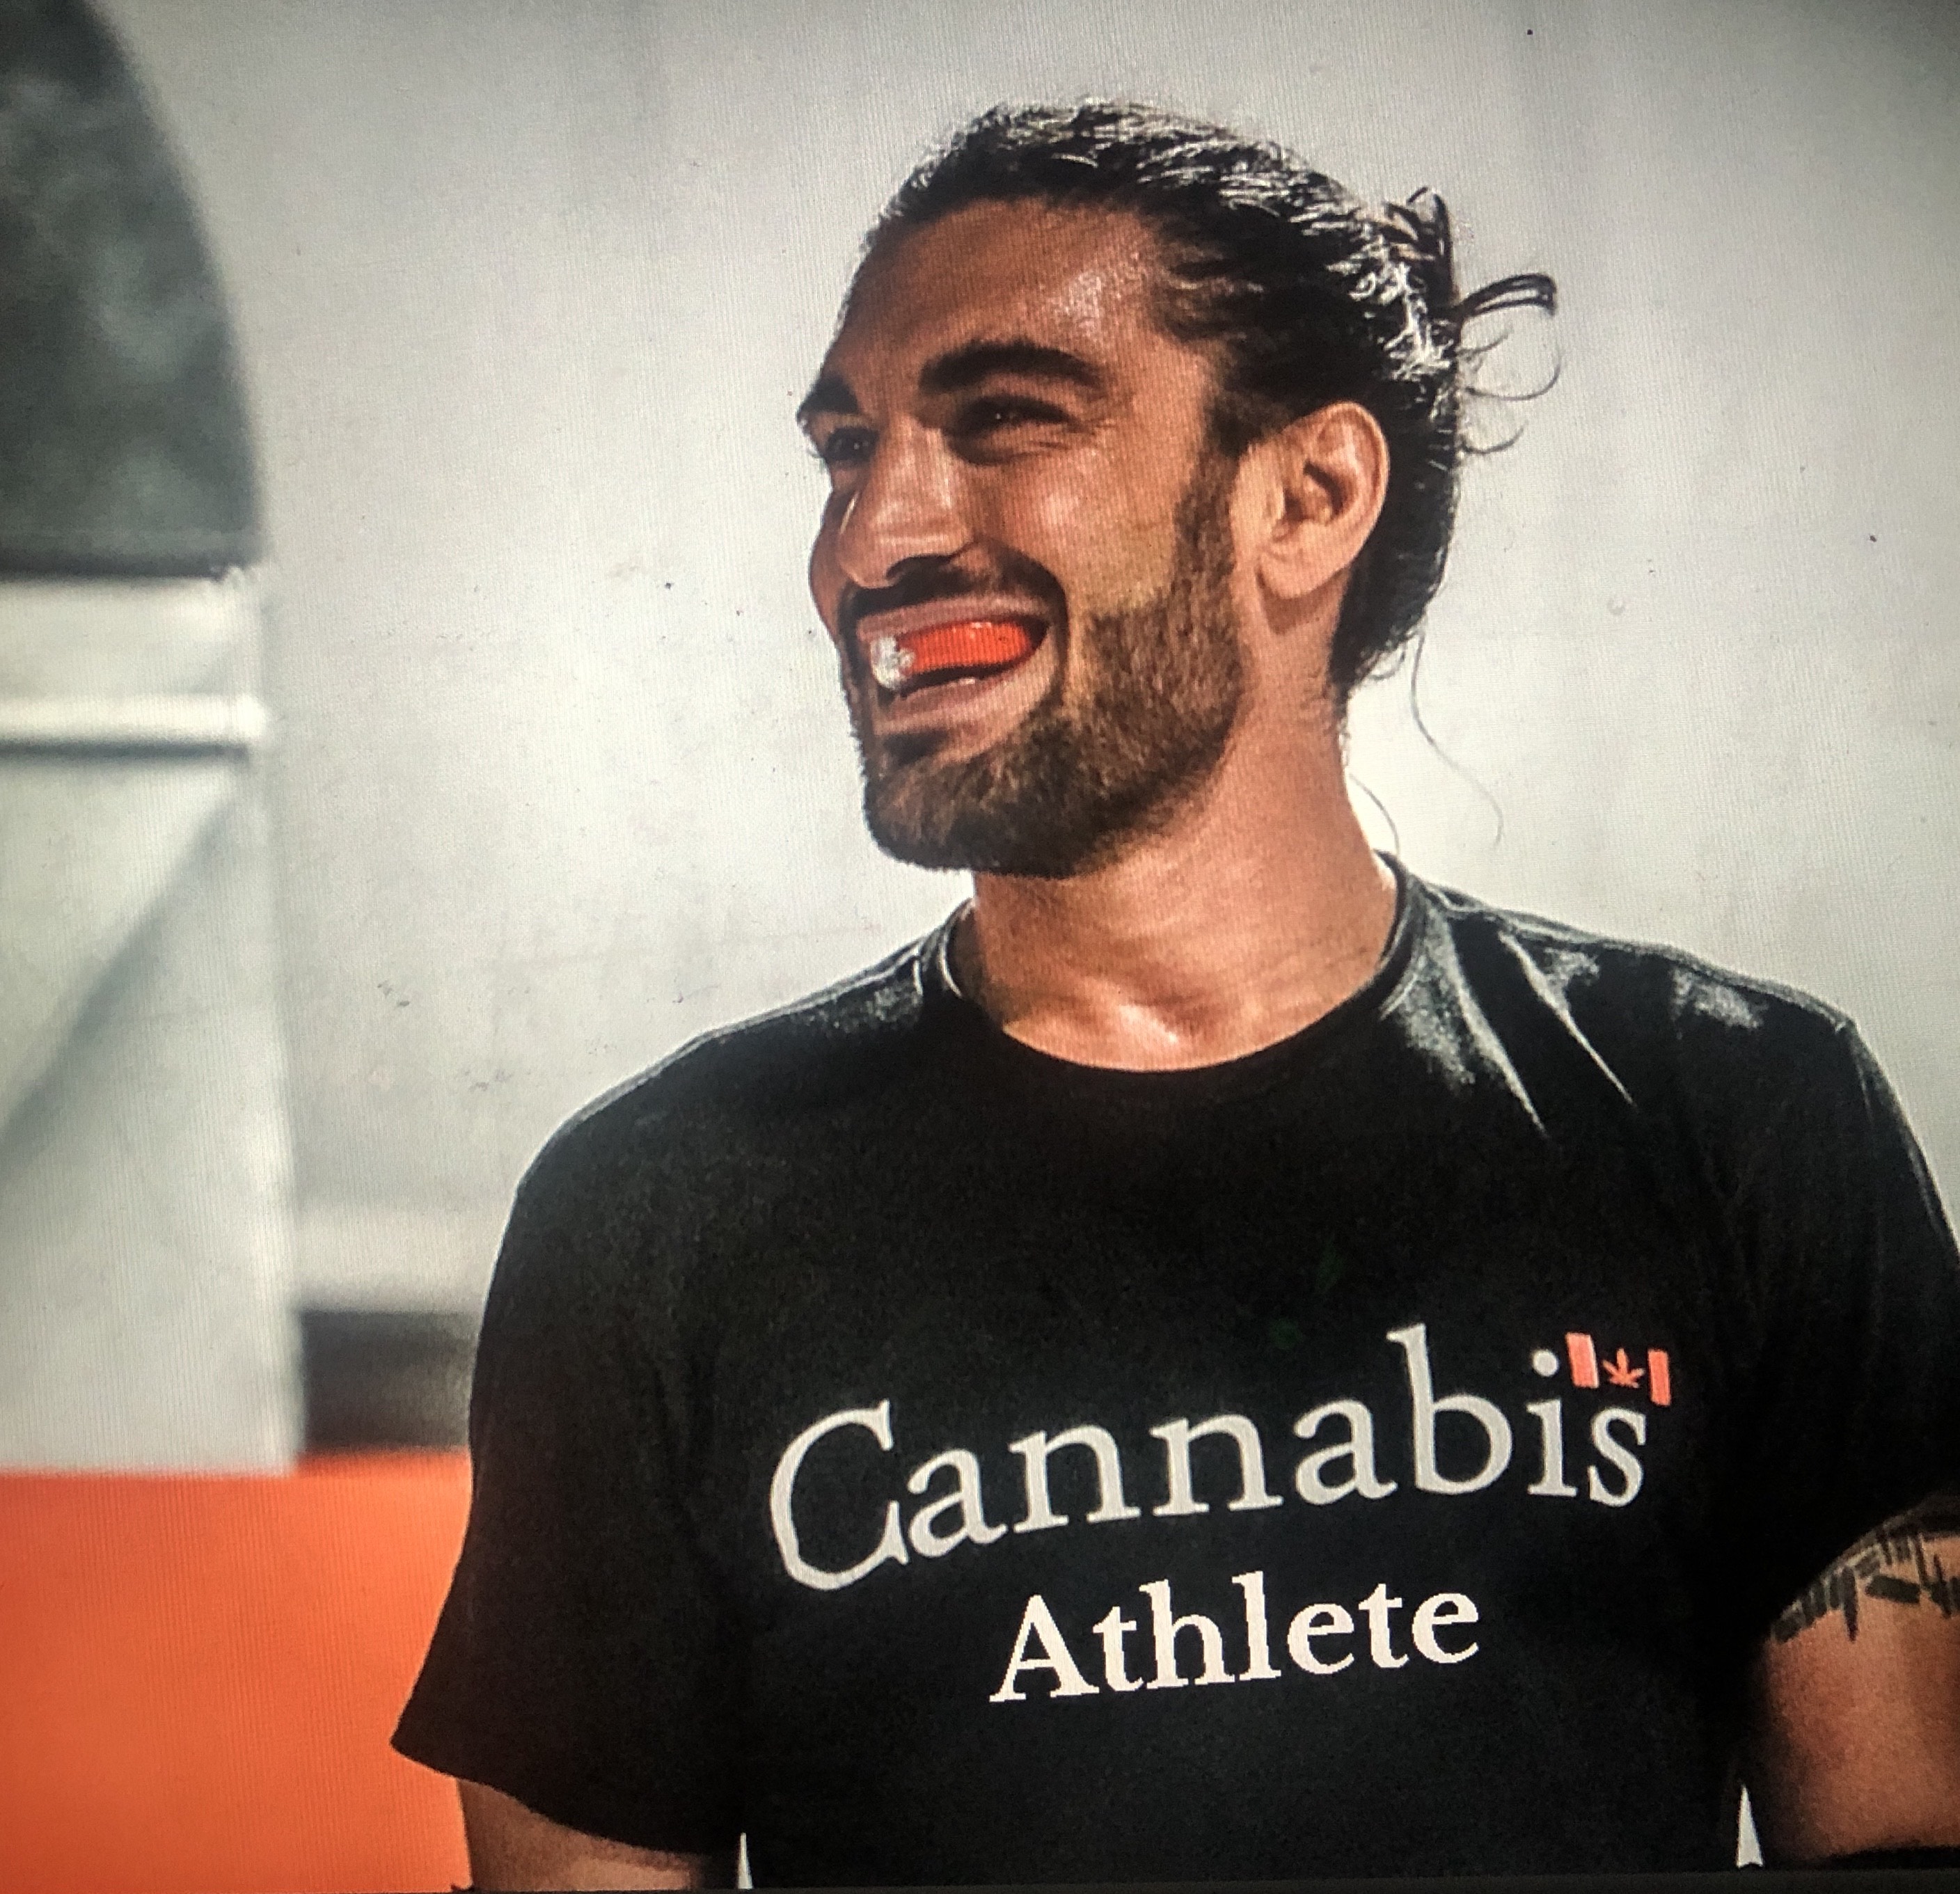 MMA Champion and Medical Cannabis advocate granted a Therapeutic Use Exemption (TUE) for Medical Cannabis from the State of Colorado